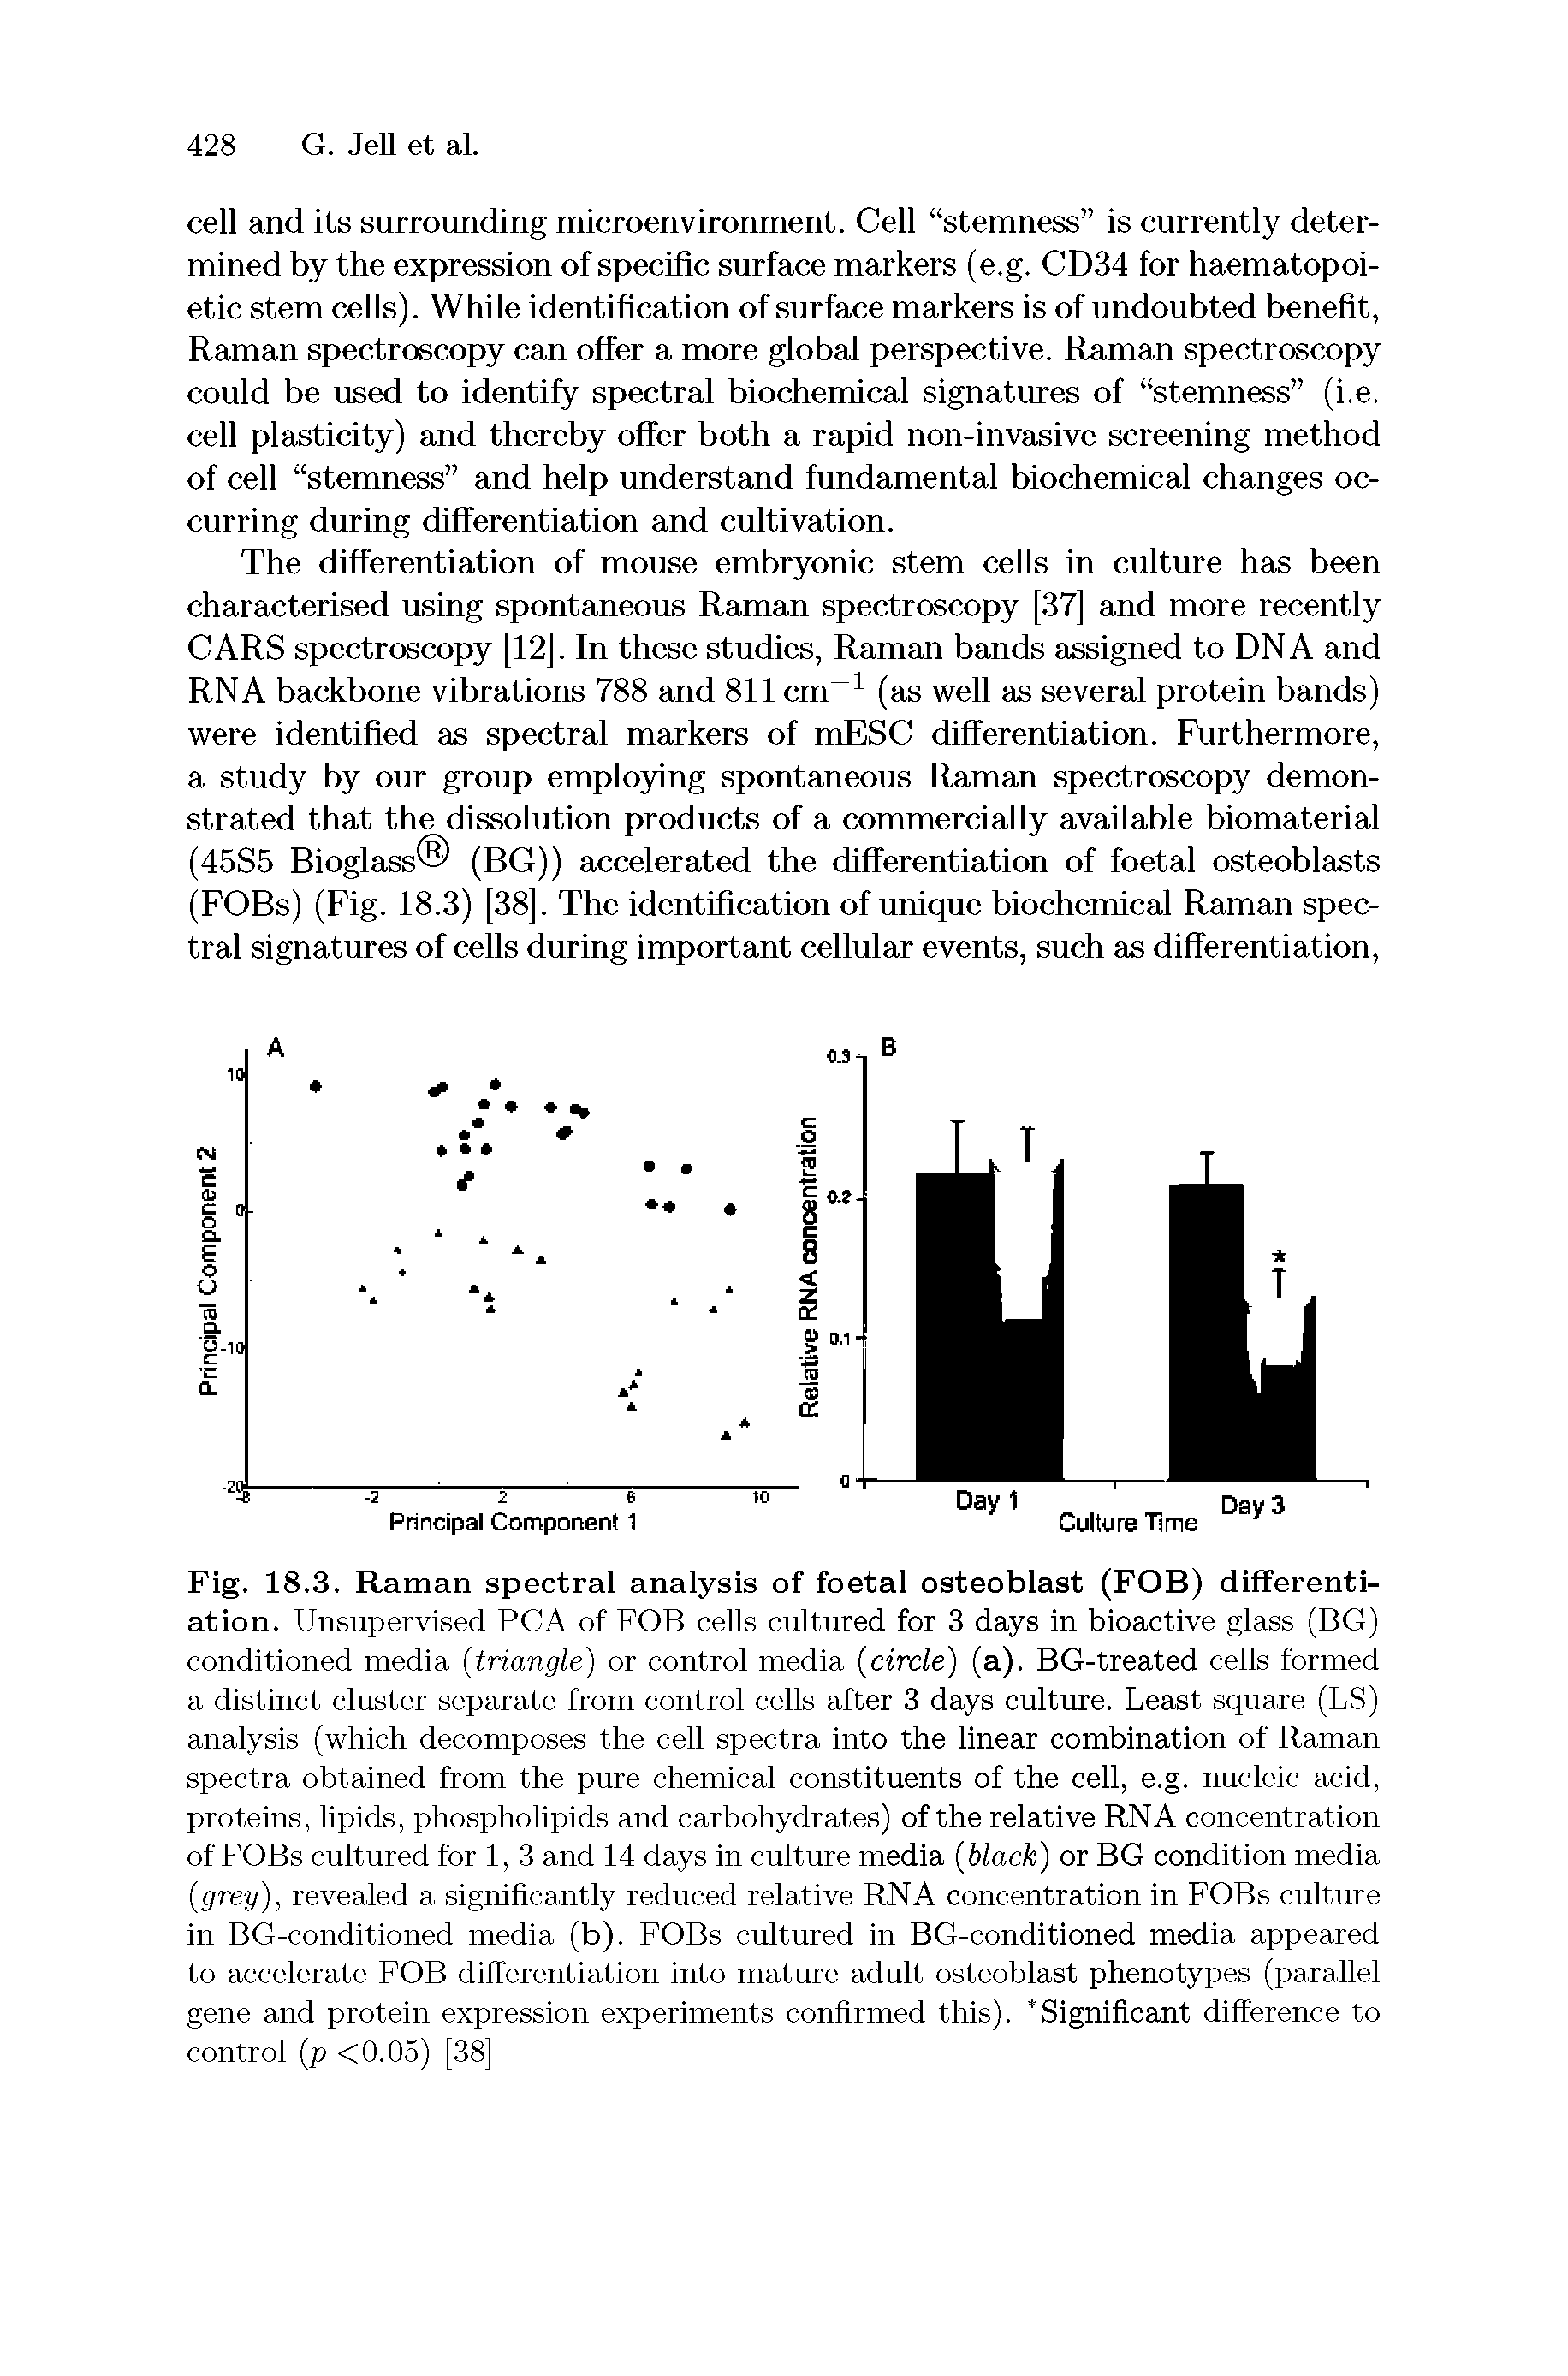 Fig. 18.3. Raman spectral analysis of foetal osteoblast (FOB) differentiation. Unsupervised PCA of FOB cells cultured for 3 days in bioactive glass (BG) conditioned media (triangle) or control media (circle) (a). BG-treated cells formed a distinct cluster separate from control cells after 3 days culture. Least square (LS) analysis (which decomposes the cell spectra into the linear combination of Raman spectra obtained from the pure chemical constituents of the cell, e.g. nucleic acid, proteins, lipids, phospholipids and carbohydrates) of the relative RNA concentration of FOBs cultured for 1, 3 and 14 days in culture media (black) or BG condition media (grey), revealed a significantly reduced relative RNA concentration in FOBs culture in BG-conditioned media (b). FOBs cultured in BG-conditioned media appeared to accelerate FOB differentiation into mature adult osteoblast phenotypes (parallel gene and protein expression experiments confirmed this). Significant difference to control (p <0.05) [38]...